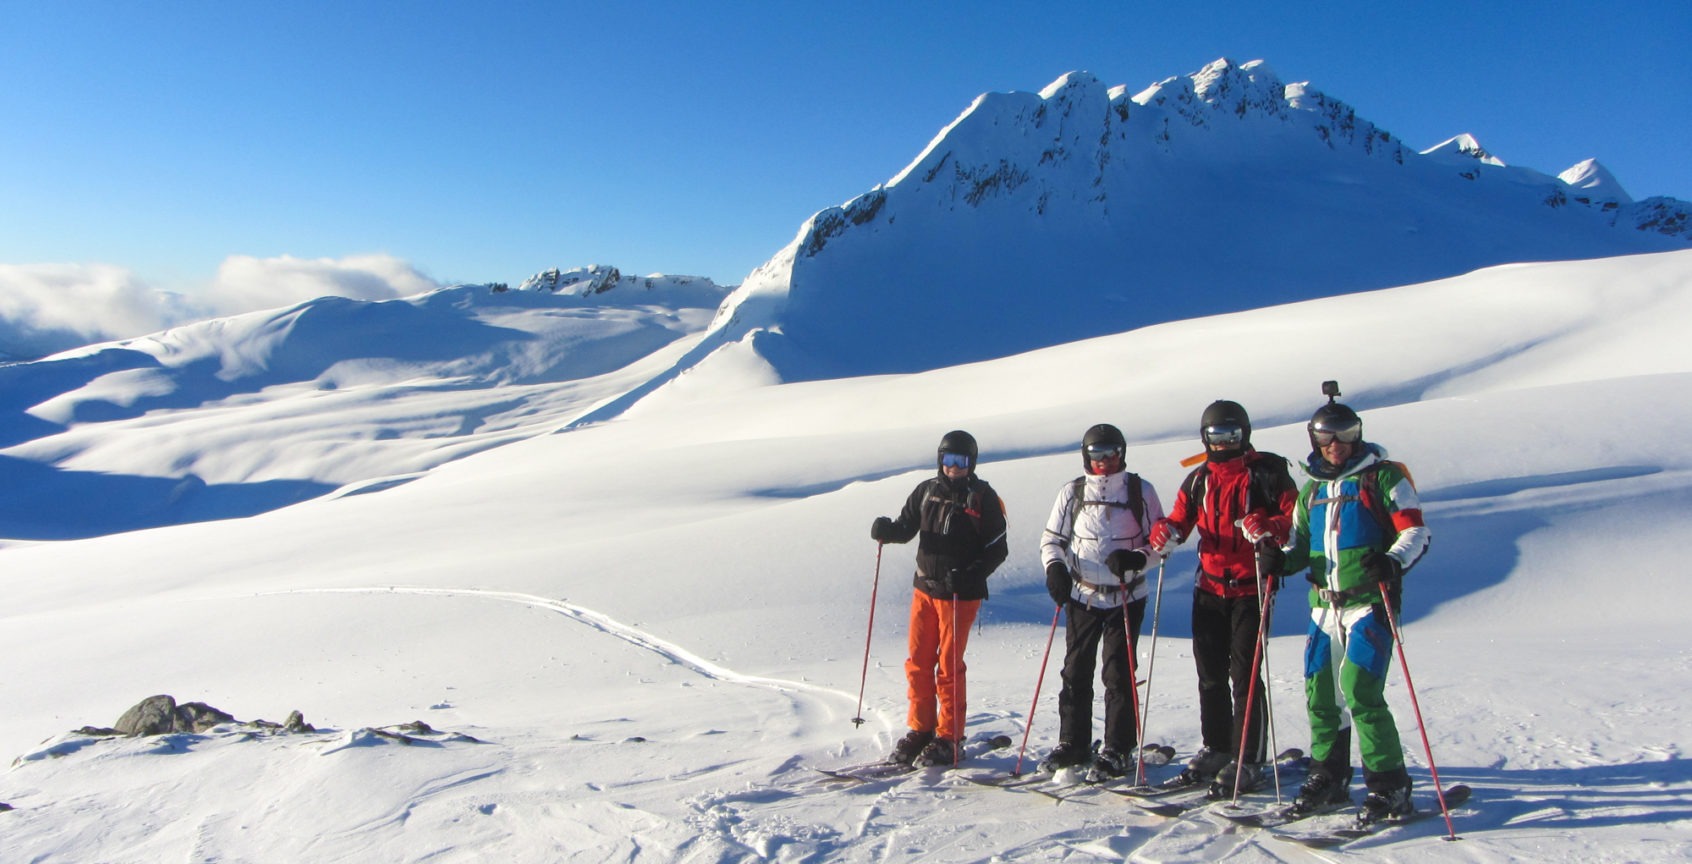 4 skiiers stand at the top of a run in the sunshine